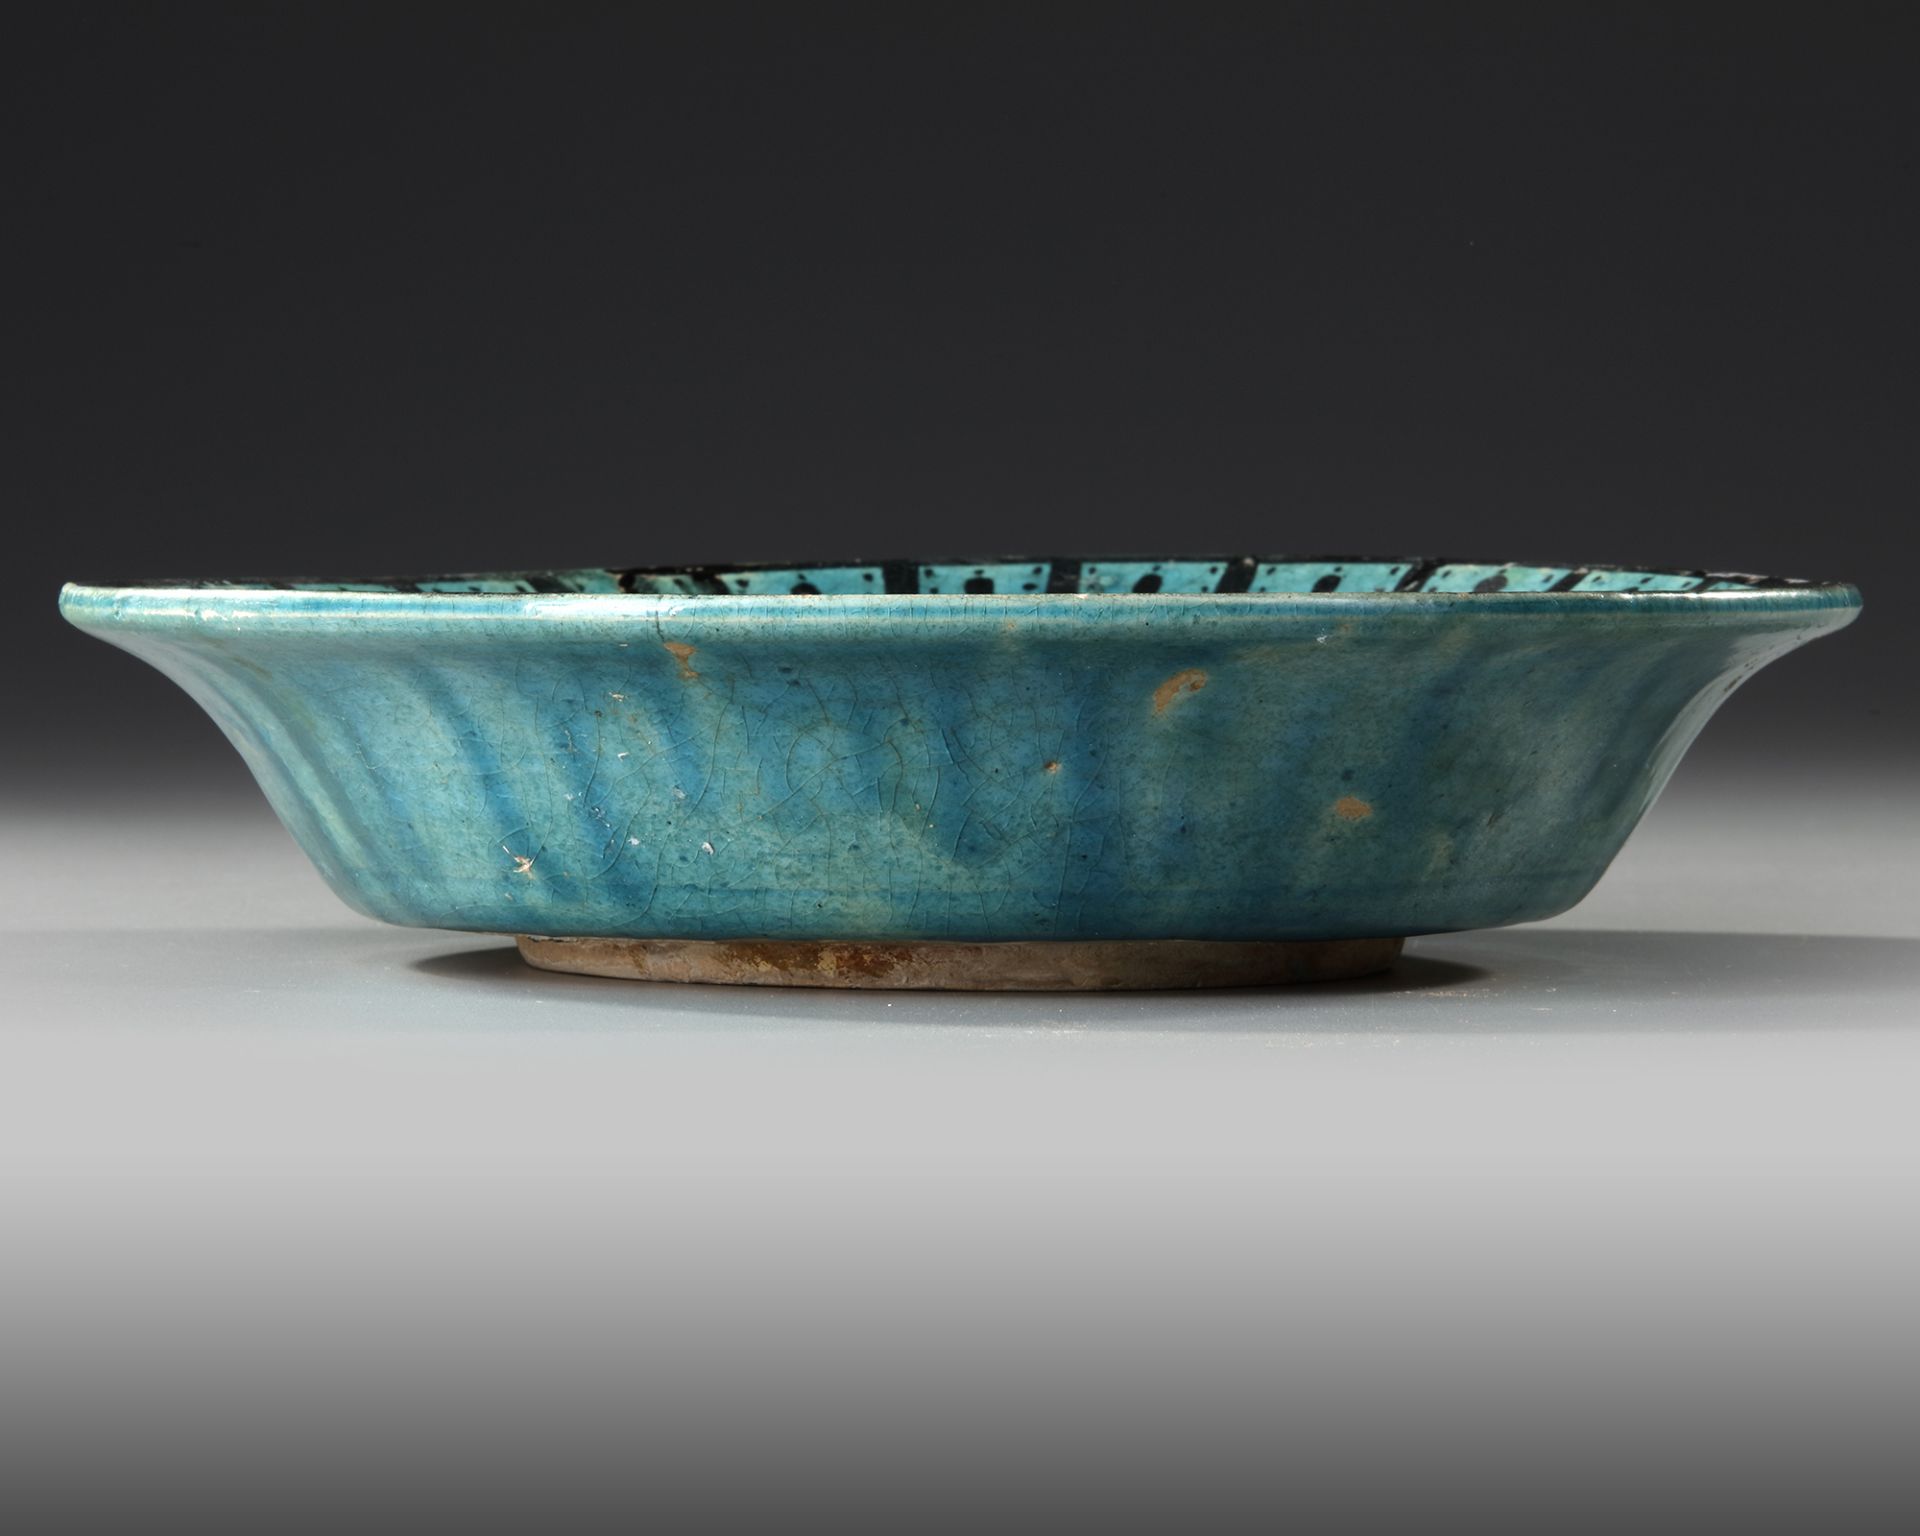 A RAQQA TURQUOISE-GLAZED POTTERY DISH, SYRIA, EARLY 13TH CENTURY - Image 6 of 8